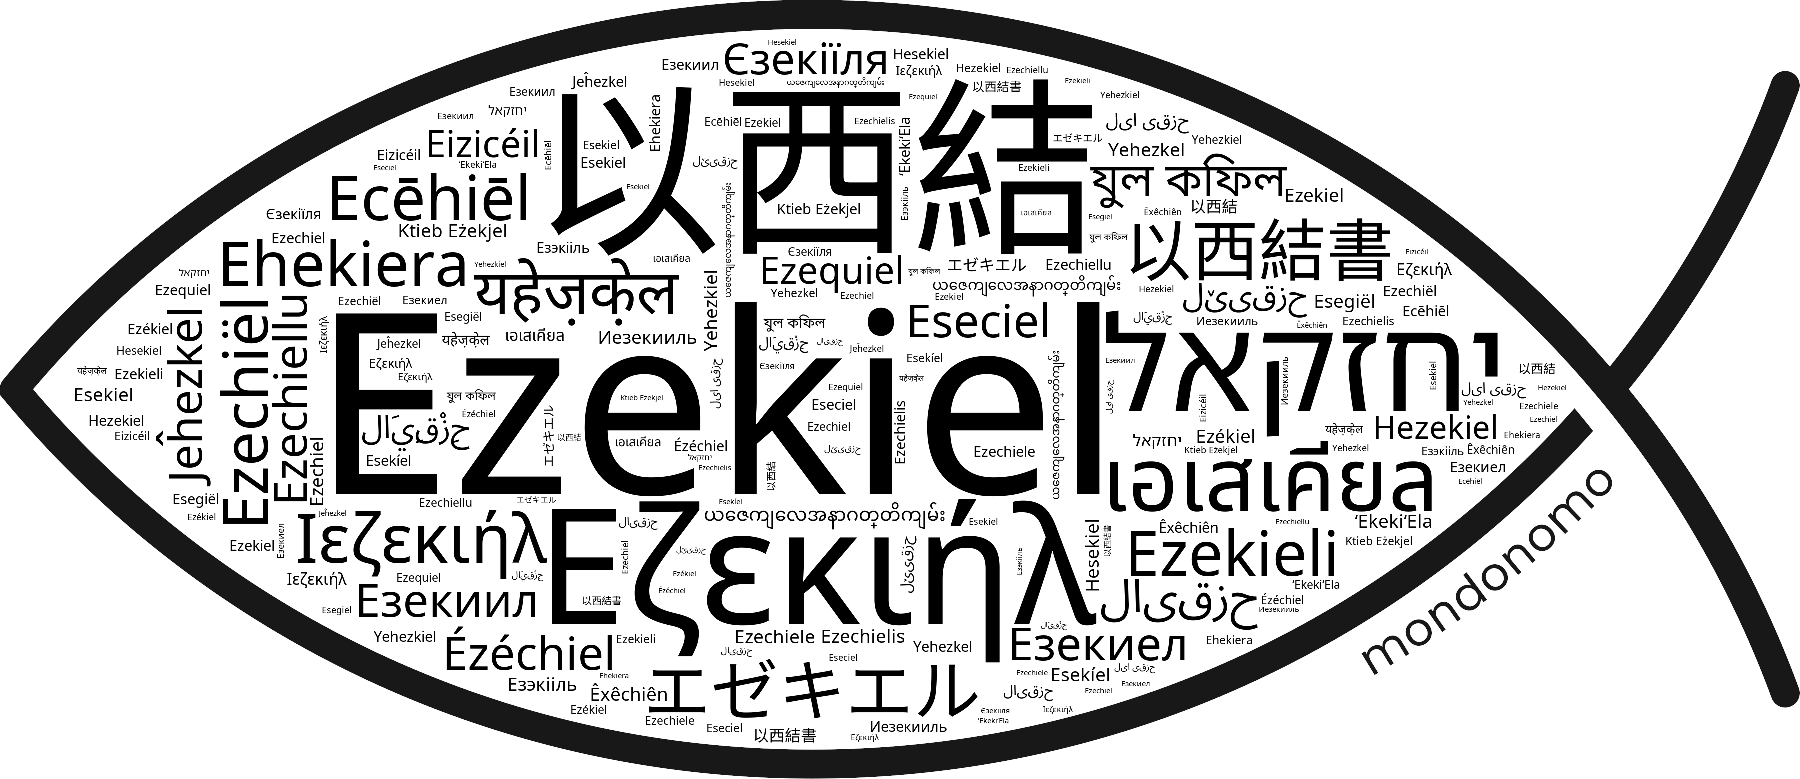 Name Ezekiel in the world's Bibles